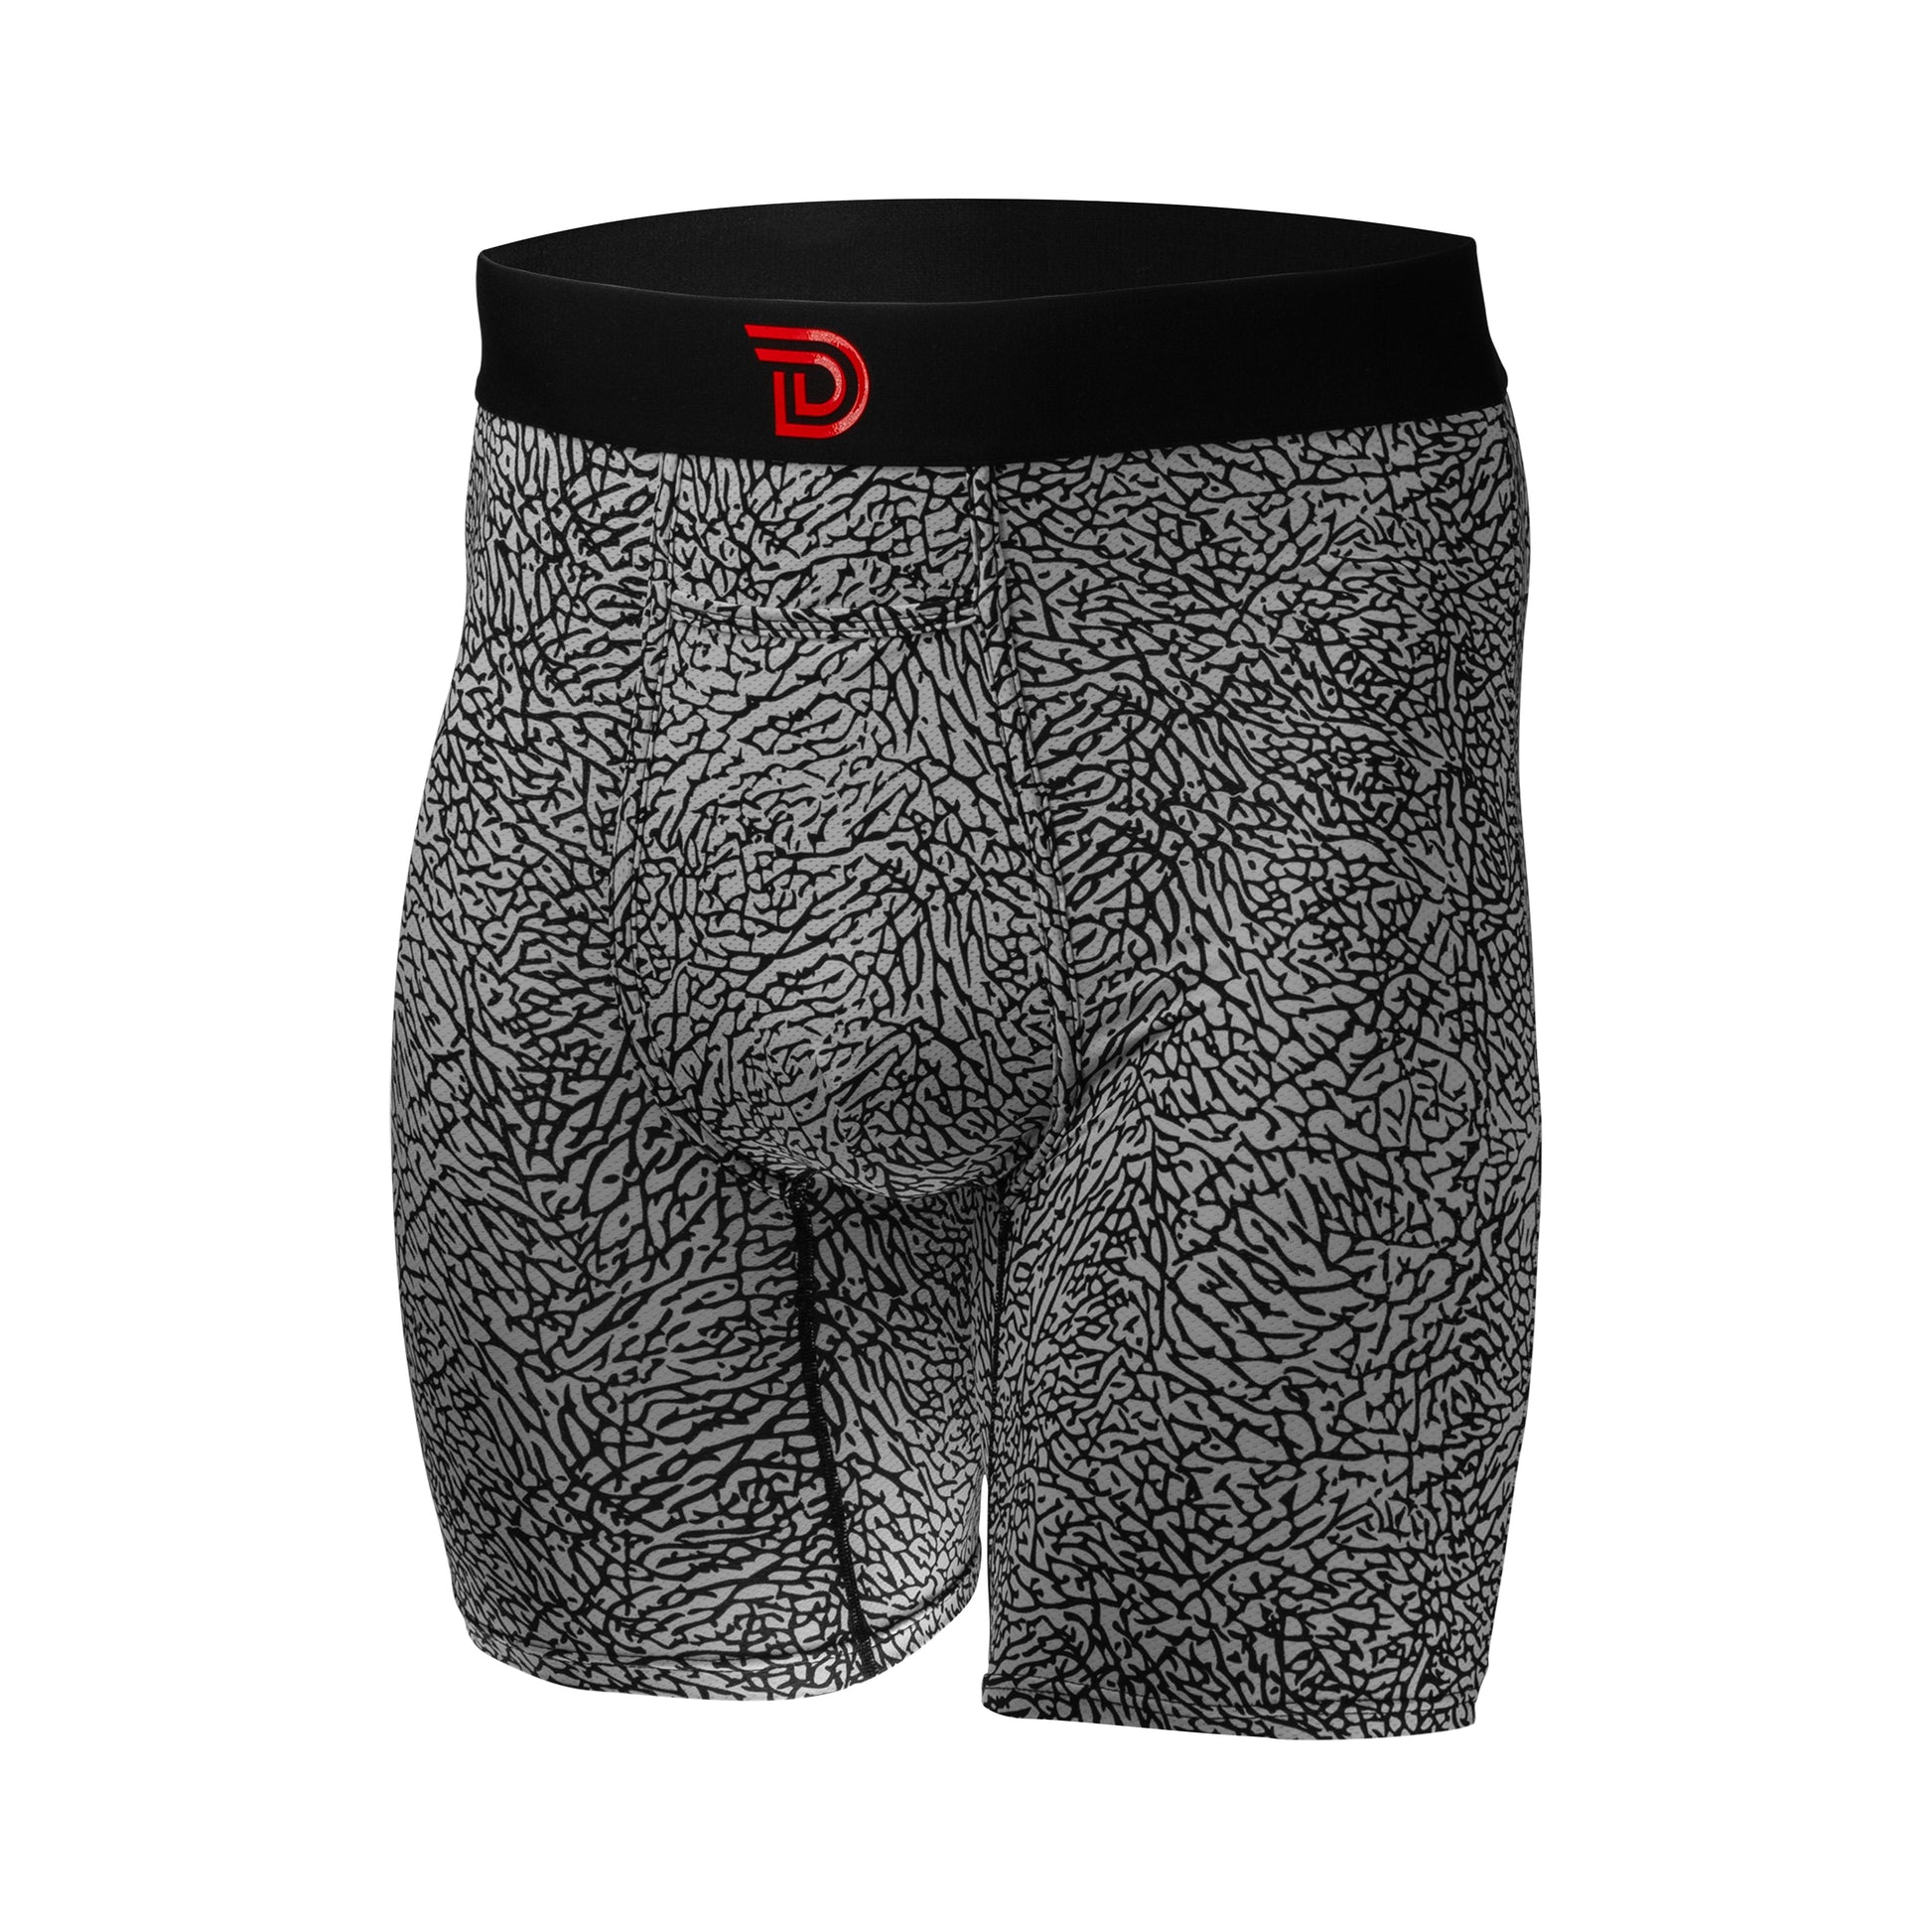 Drawlz Brand Co. , LLC Boxer Brief Ultimate G.O.A.T Pack